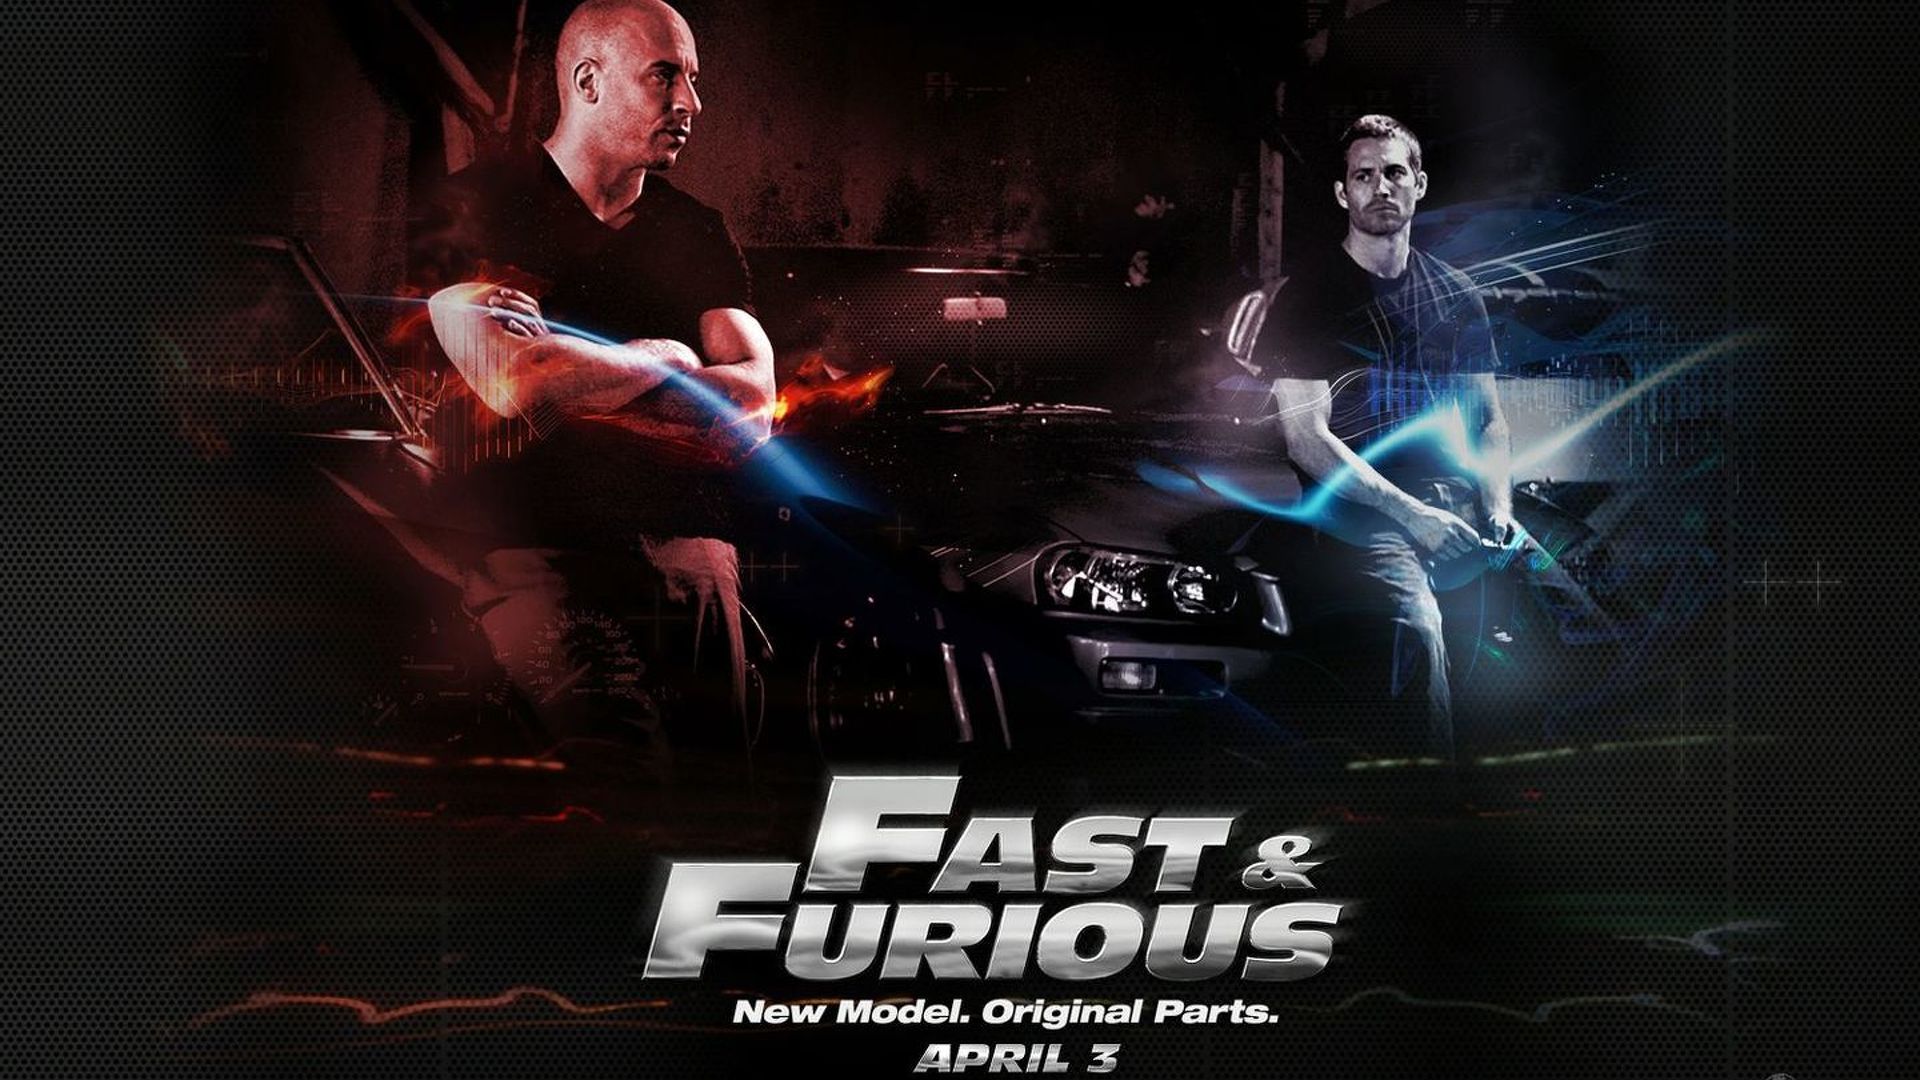 Fast and Furious 4 Wallpaper Free Fast and Furious 4 Background